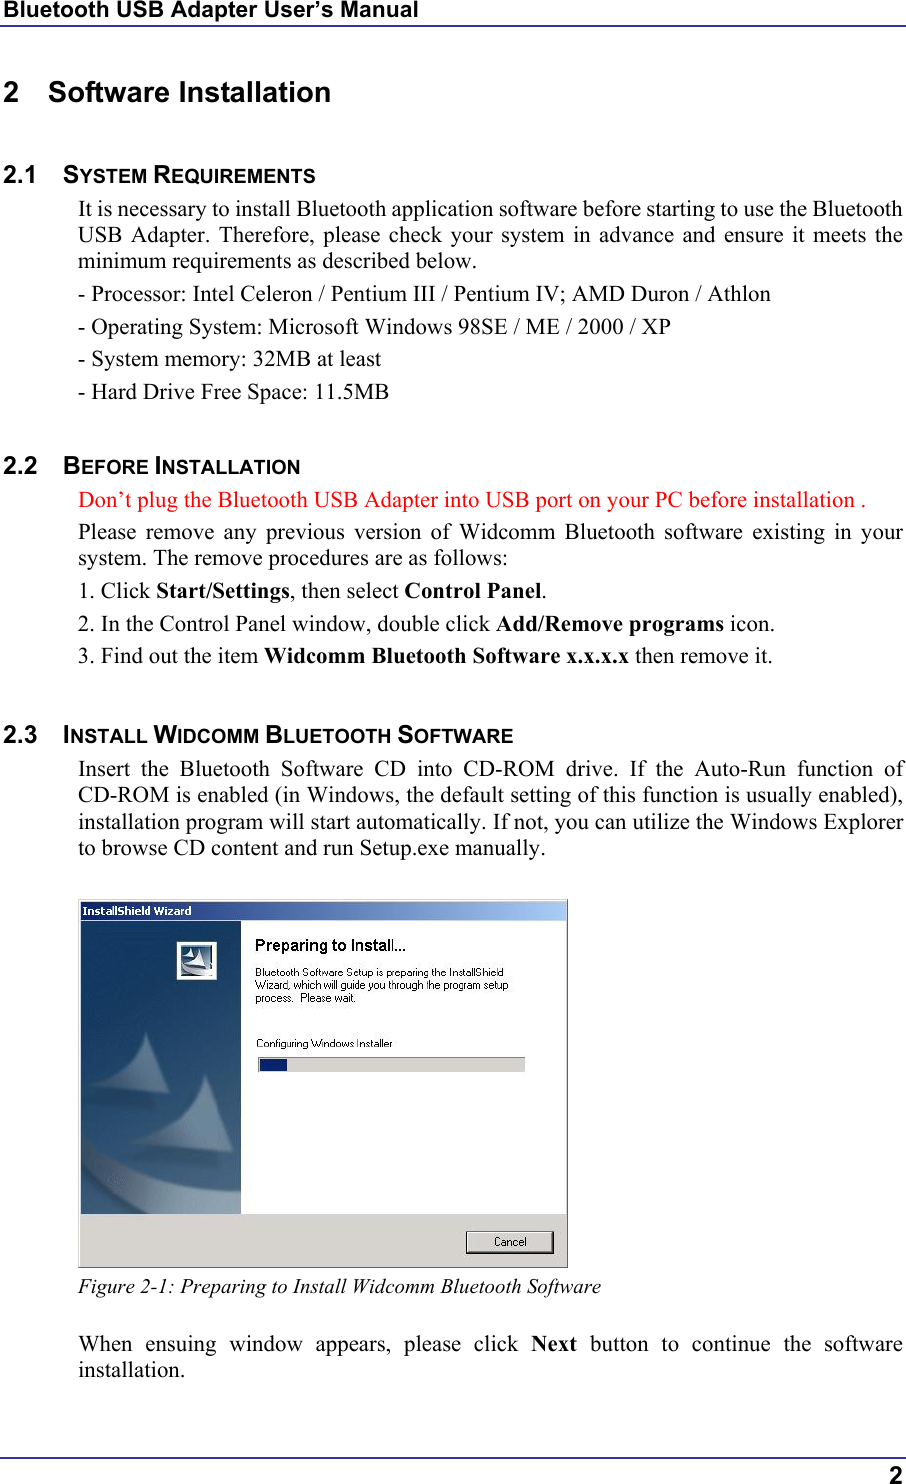 Bluetooth USB Adapter User’s Manual 2 Software Installation  2.1 SYSTEM REQUIREMENTS It is necessary to install Bluetooth application software before starting to use the Bluetooth USB Adapter. Therefore, please check your system in advance and ensure it meets the minimum requirements as described below. - Processor: Intel Celeron / Pentium III / Pentium IV; AMD Duron / Athlon - Operating System: Microsoft Windows 98SE / ME / 2000 / XP - System memory: 32MB at least - Hard Drive Free Space: 11.5MB  2.2 BEFORE INSTALLATION  Don’t plug the Bluetooth USB Adapter into USB port on your PC before installation . Please remove any previous version of Widcomm Bluetooth software existing in your system. The remove procedures are as follows: 1. Click Start/Settings, then select Control Panel. 2. In the Control Panel window, double click Add/Remove programs icon. 3. Find out the item Widcomm Bluetooth Software x.x.x.x then remove it.  2.3 INSTALL WIDCOMM BLUETOOTH SOFTWARE Insert the Bluetooth Software CD into CD-ROM drive. If the Auto-Run function of CD-ROM is enabled (in Windows, the default setting of this function is usually enabled), installation program will start automatically. If not, you can utilize the Windows Explorer to browse CD content and run Setup.exe manually.   Figure 2-1: Preparing to Install Widcomm Bluetooth Software  When ensuing window appears, please click Next  button to continue the software installation.  2 